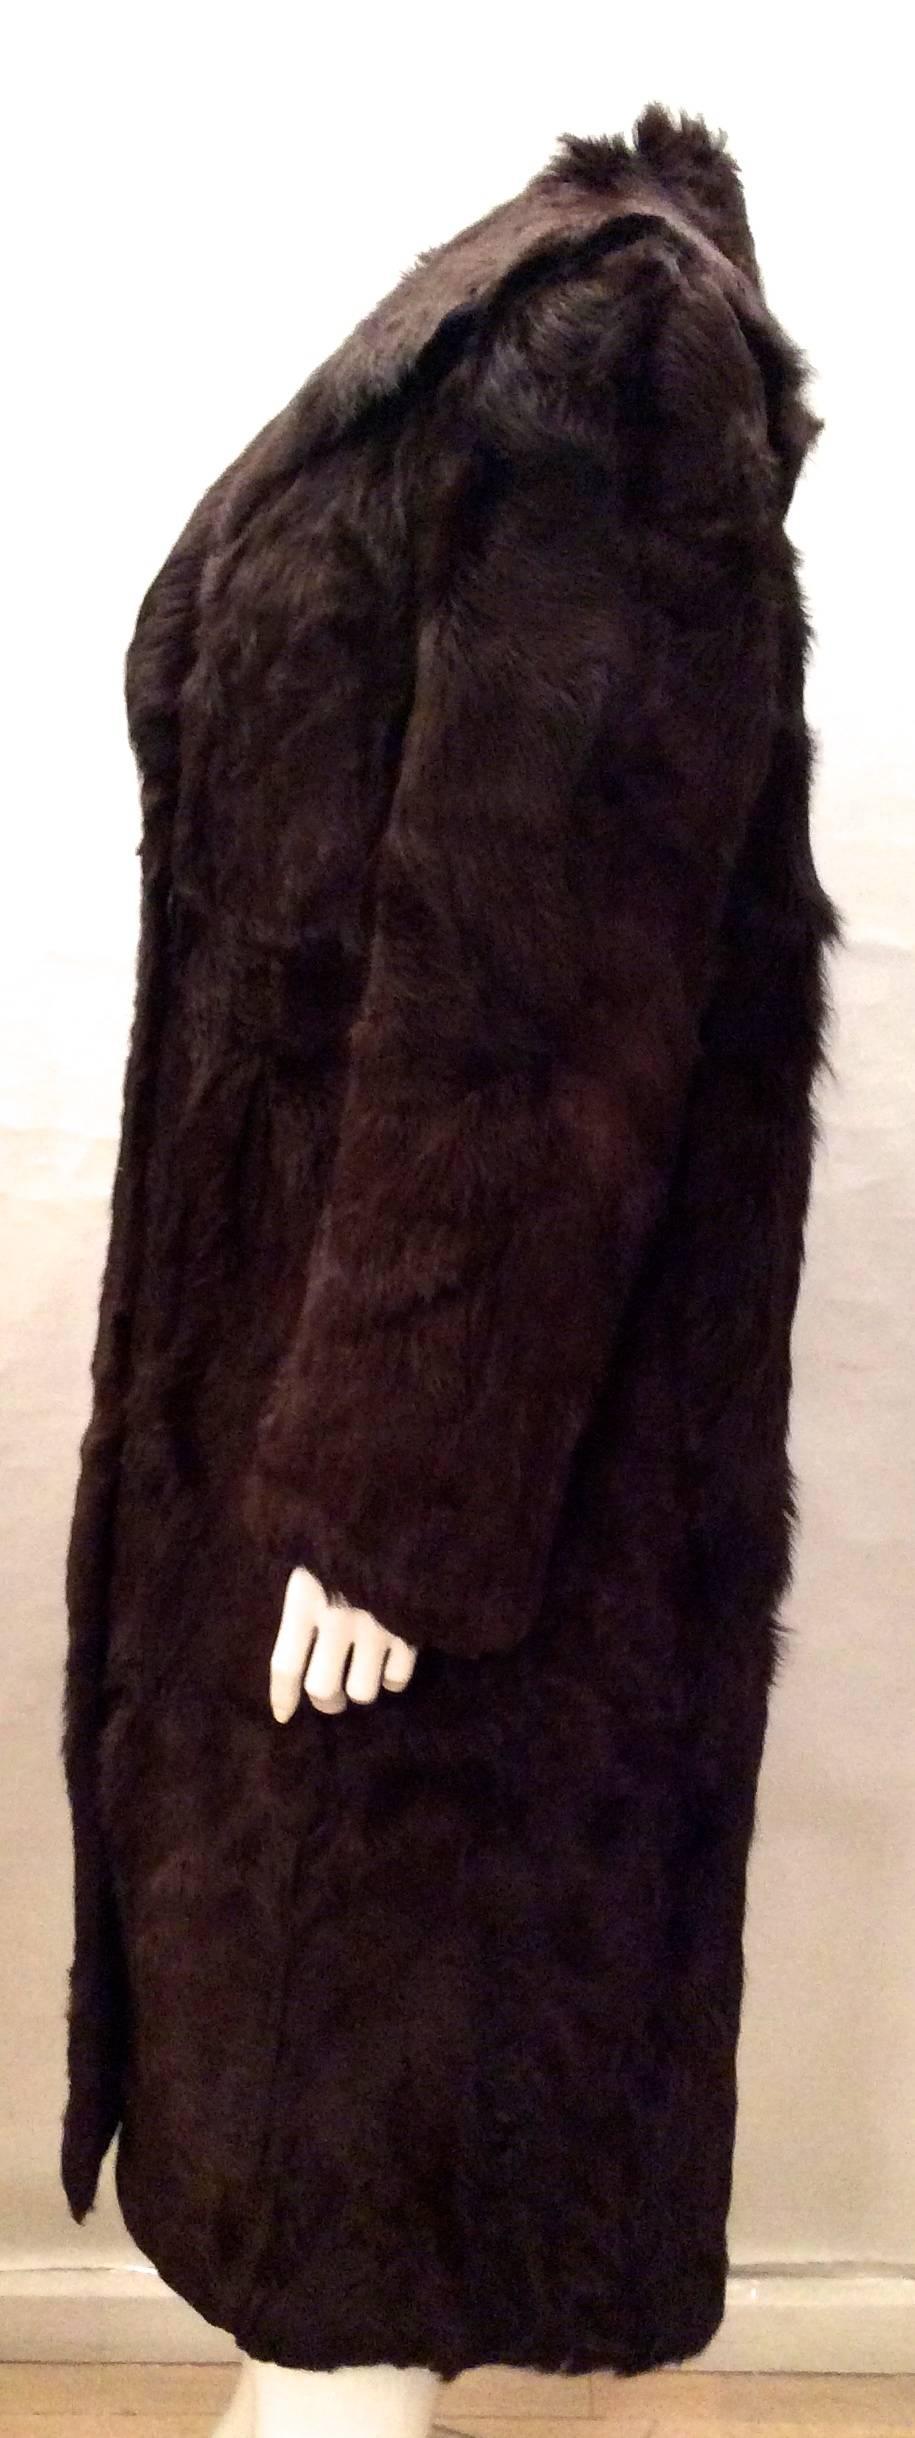 This beautiful chocolate brown full length extremely rare goat fur is from the 1950's. It is an approximate US size 6 to 8. The coat was custom made with extreme attention to detail. The brown silk lining of the coat is custom made and hand sewn